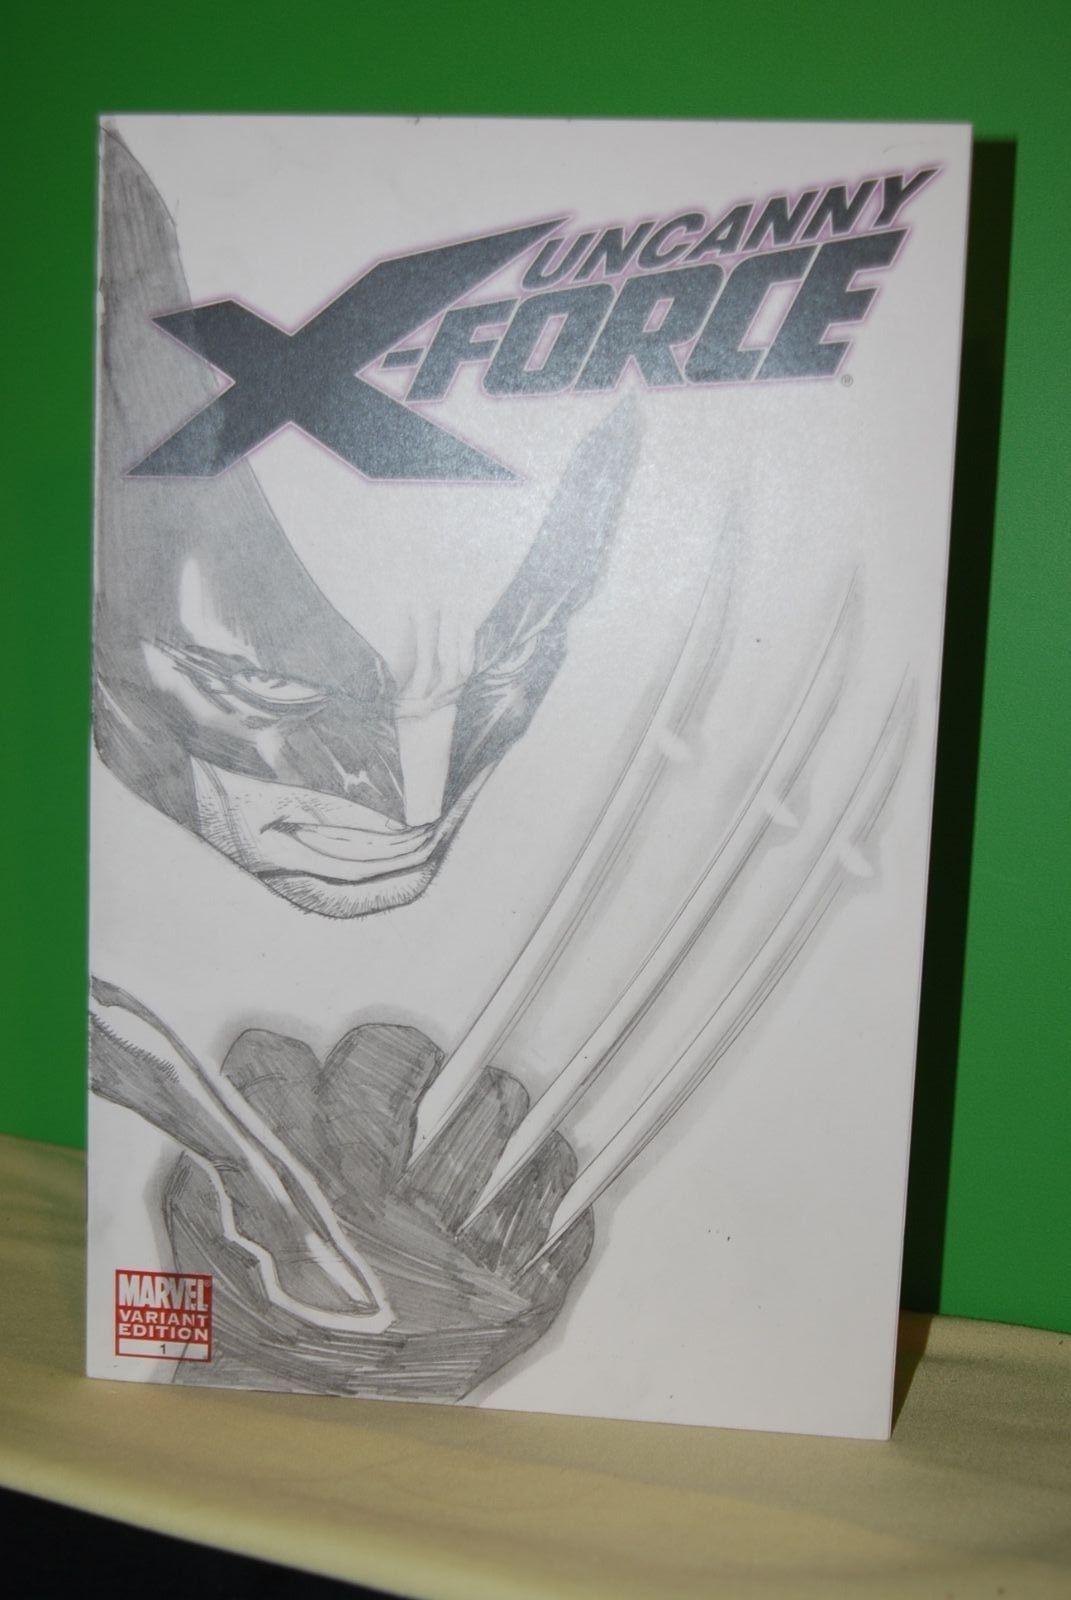 UNCANNY X-FORCE (2010) #1Variant MARVEL (COVER Sketch By MEDINA) NM+